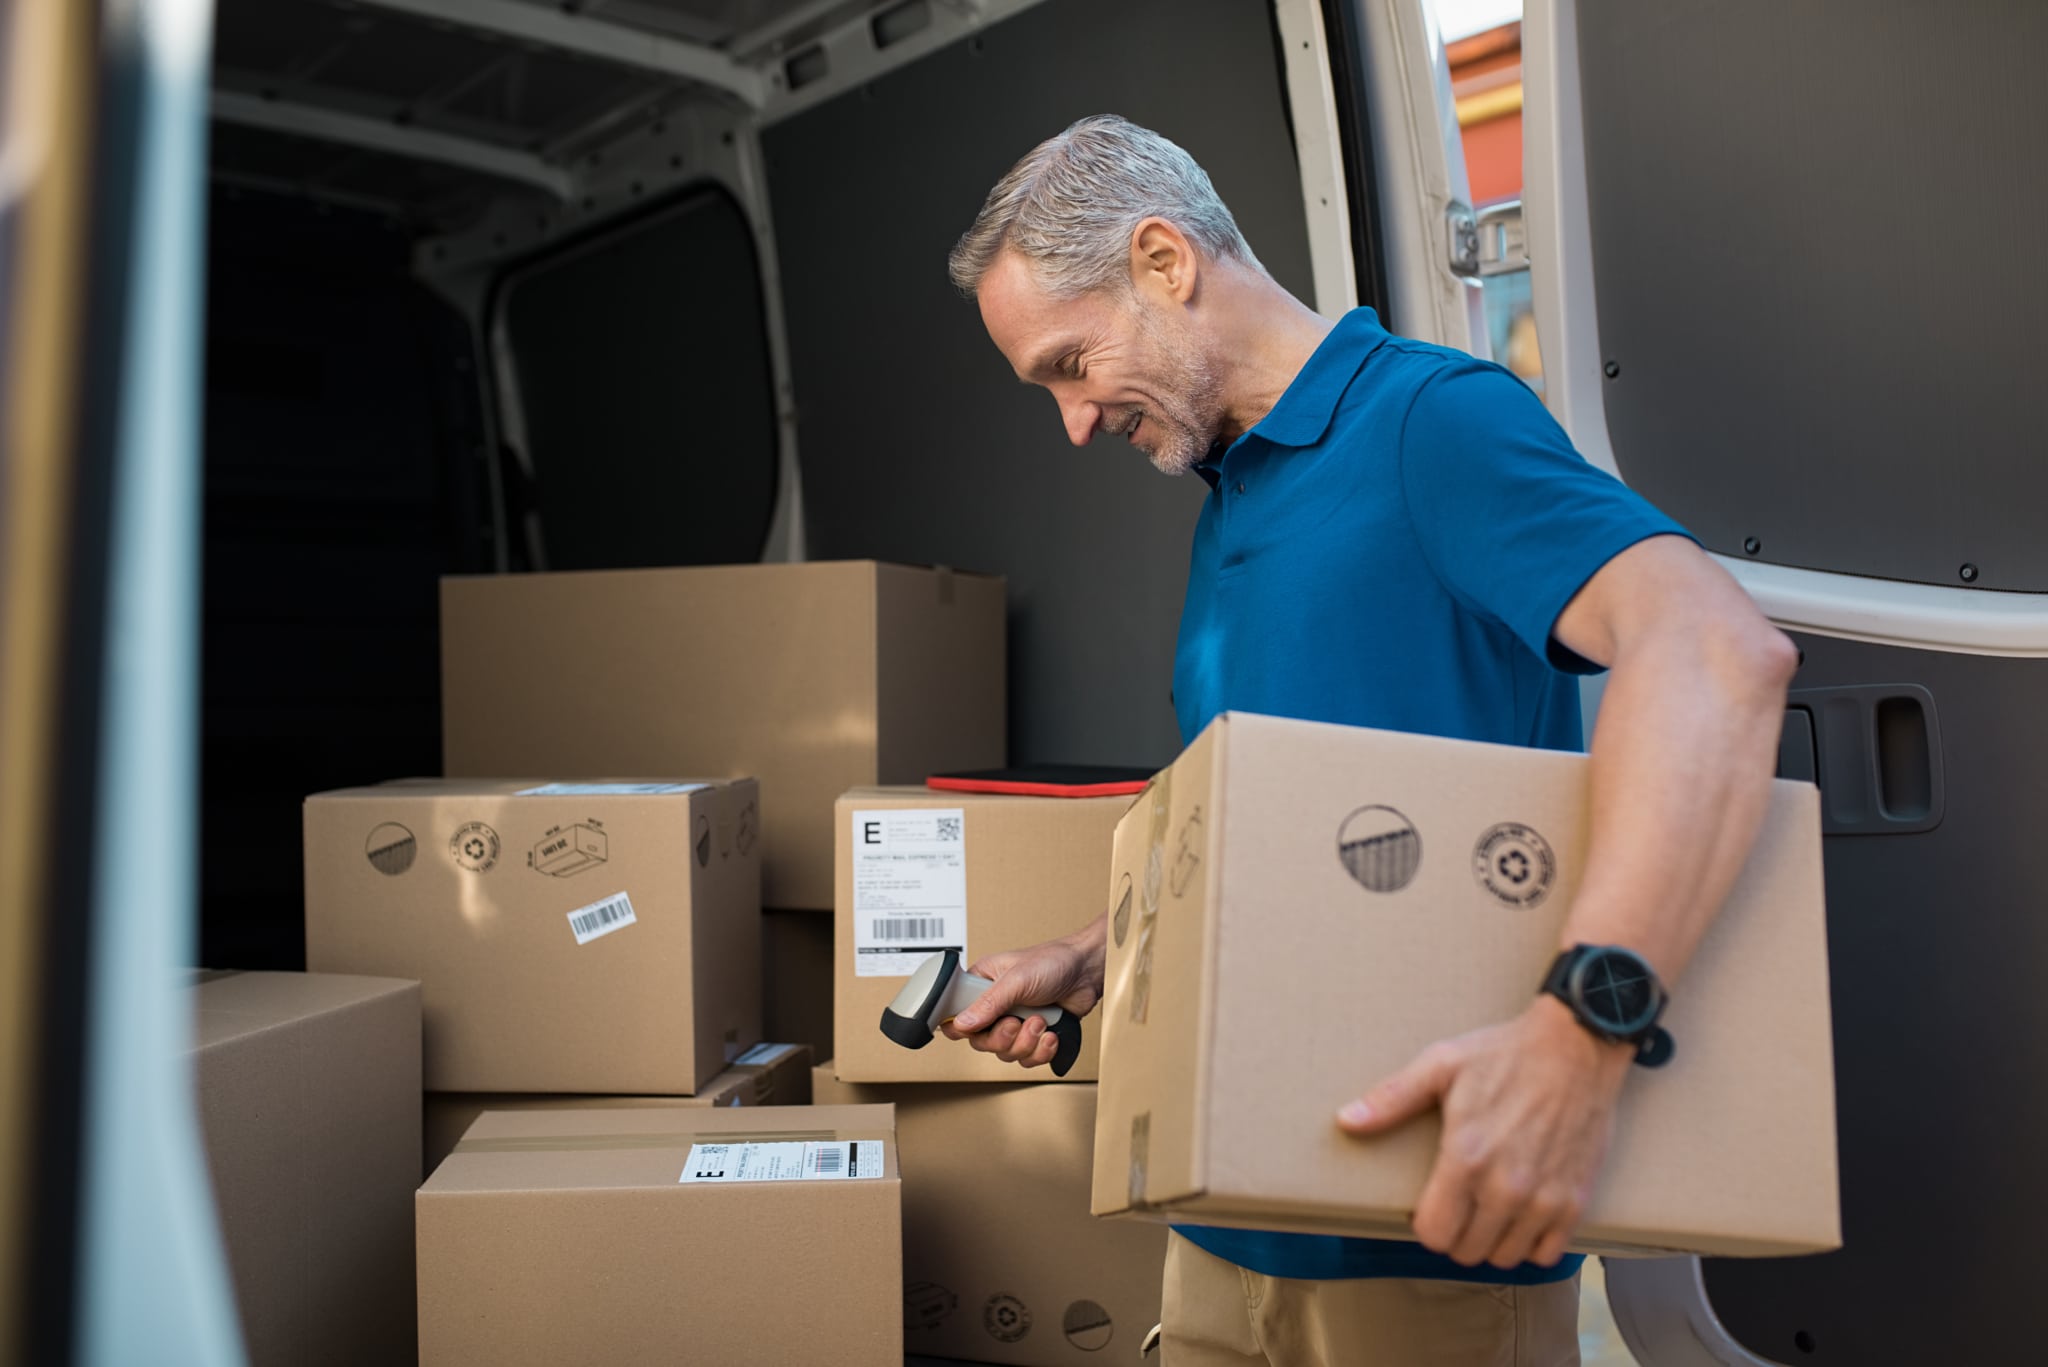 Delivery man scanning package barcodes in a van